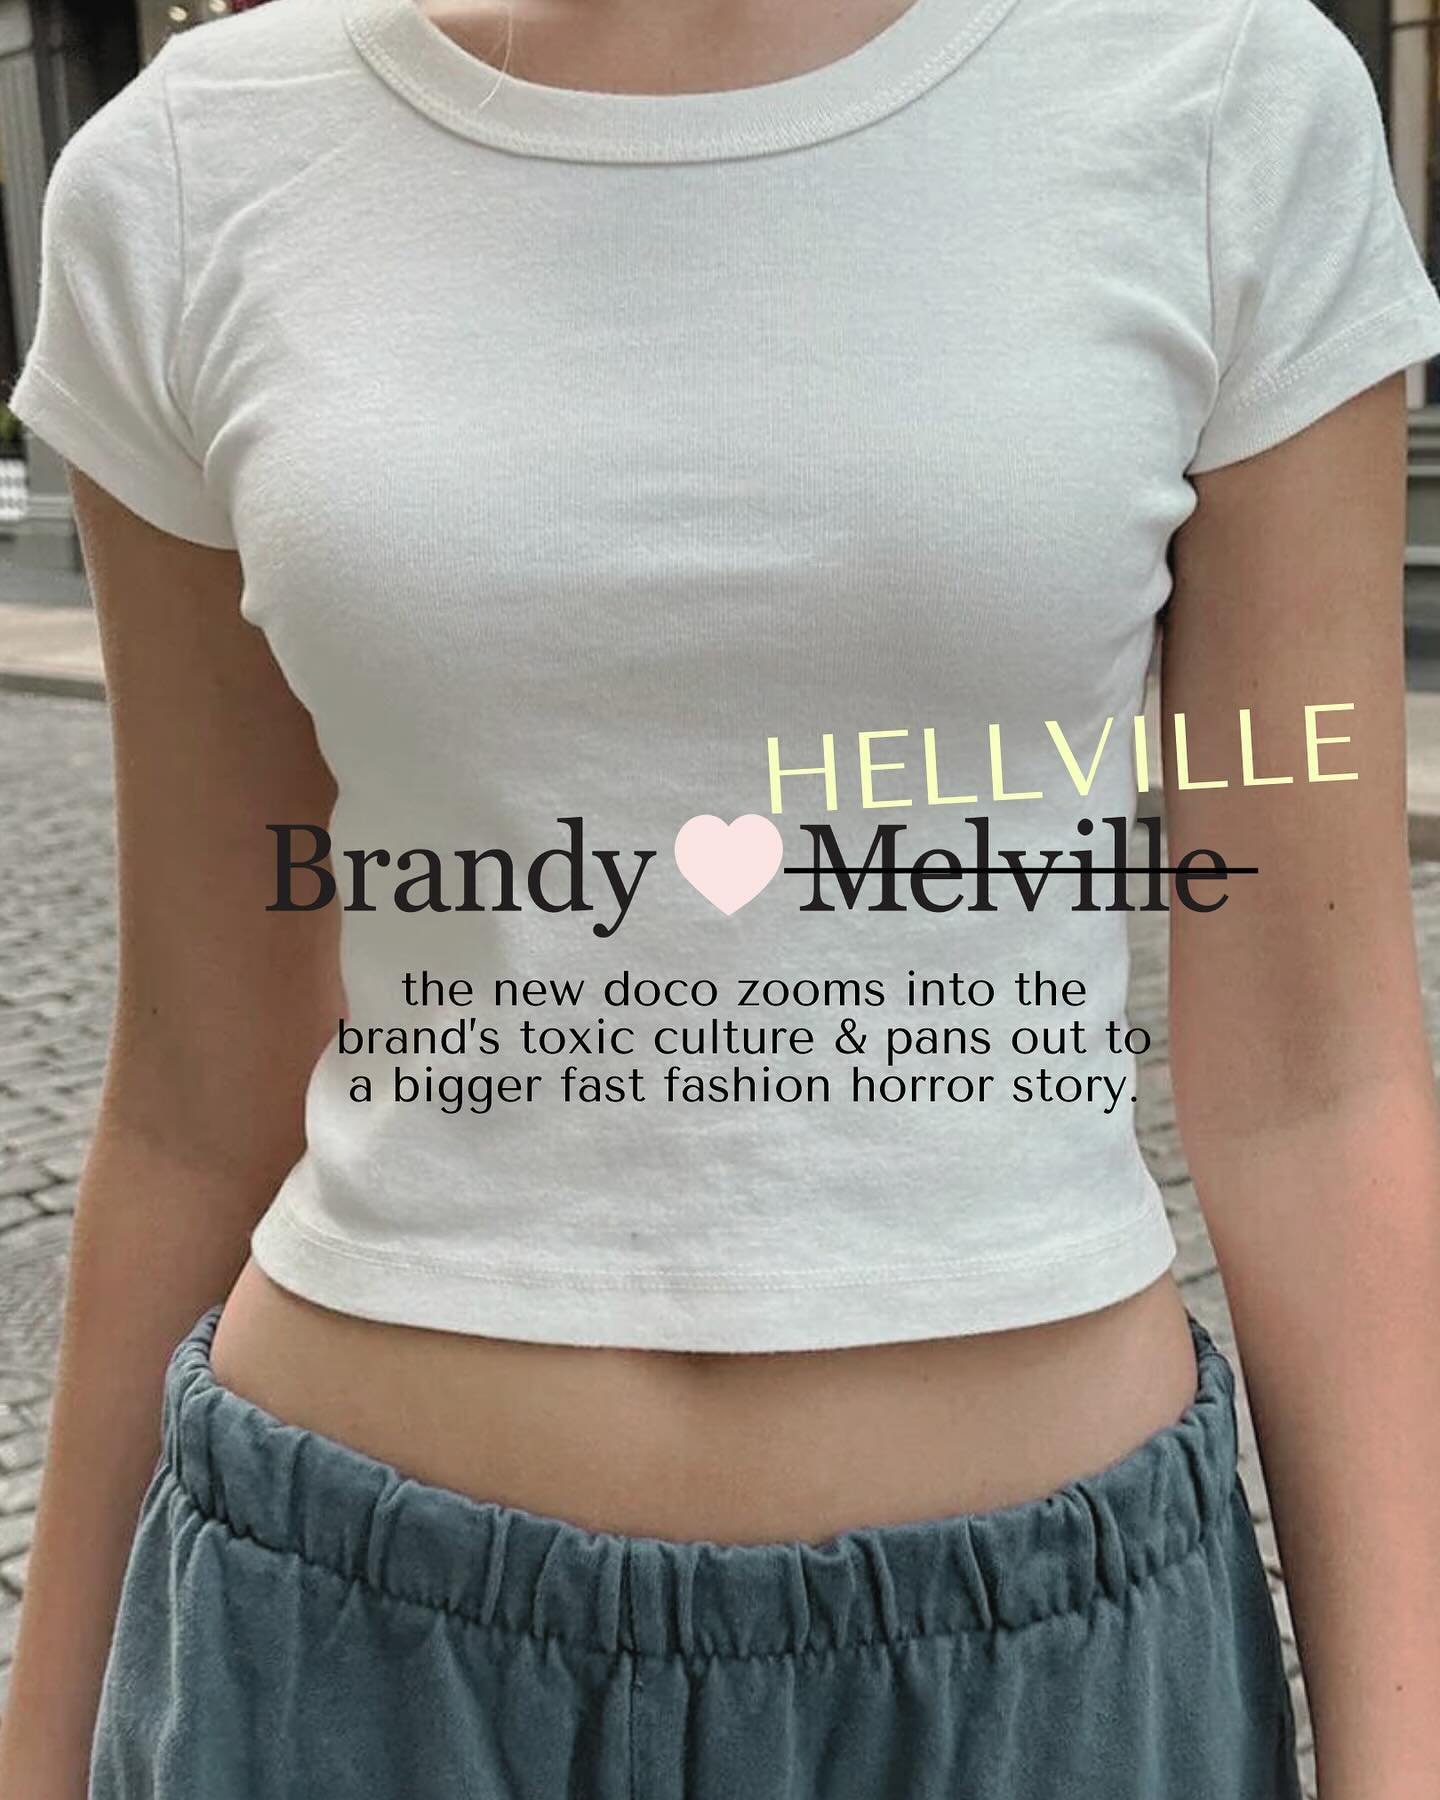 IT WILL SHOCK YOU - A MUST WATCH

New doco on Brandy Melville, zooms into the brand&rsquo;s toxic culture &amp; pans out to a bigger fast fashion horror story. 
Watch it now on @binge 

#brandyhellville @brandymelvilleusa 

Sources: 
@thevofashion So